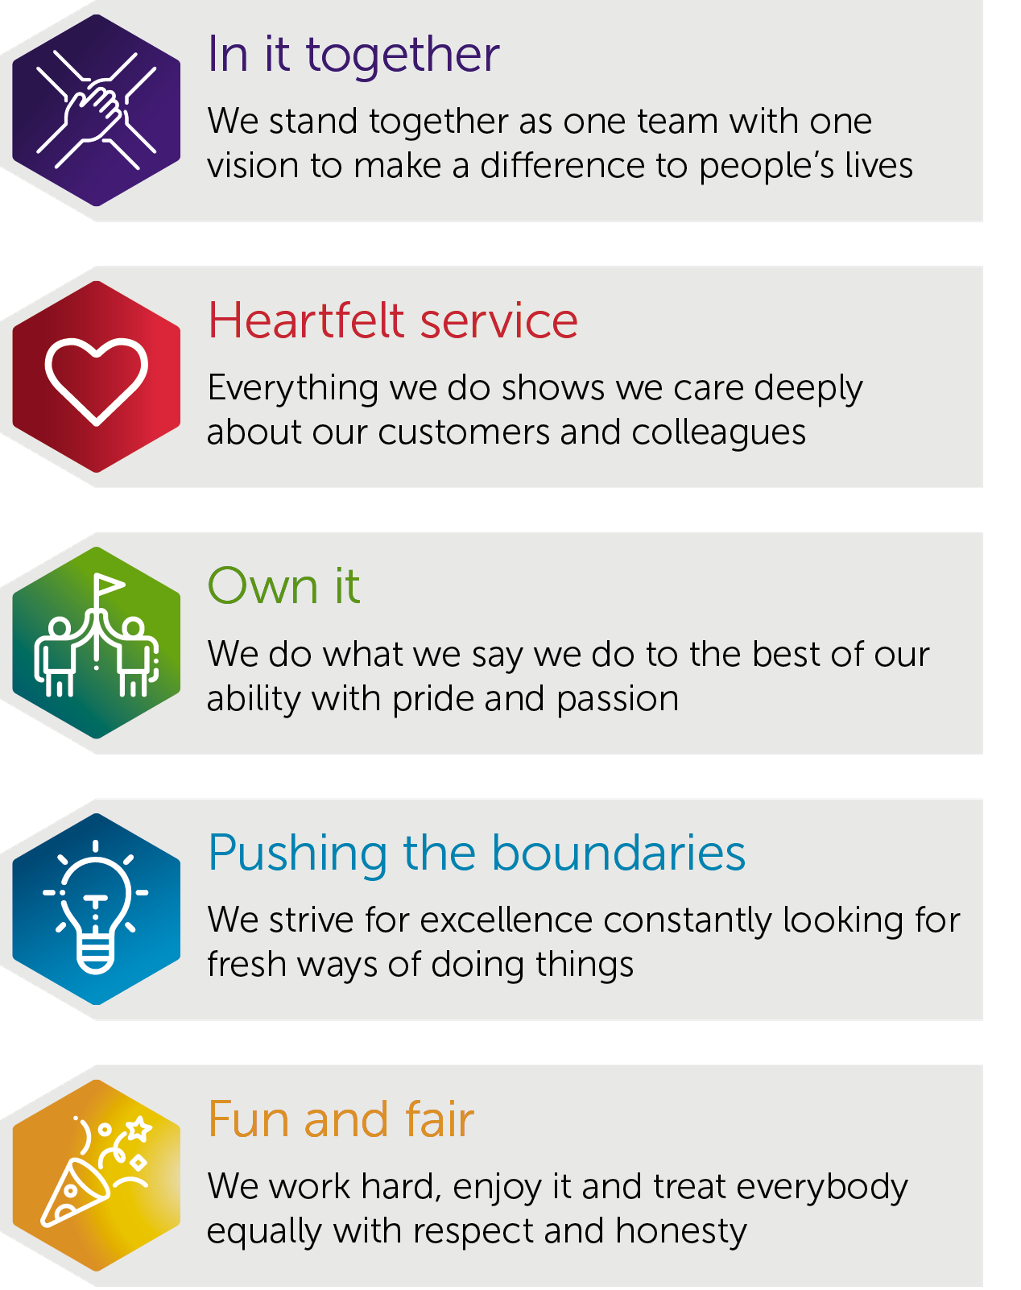 Longhurst Group's values – In it together, Heartfelt service, Own it, Pushing the boundaries, Own it, Fun and fair